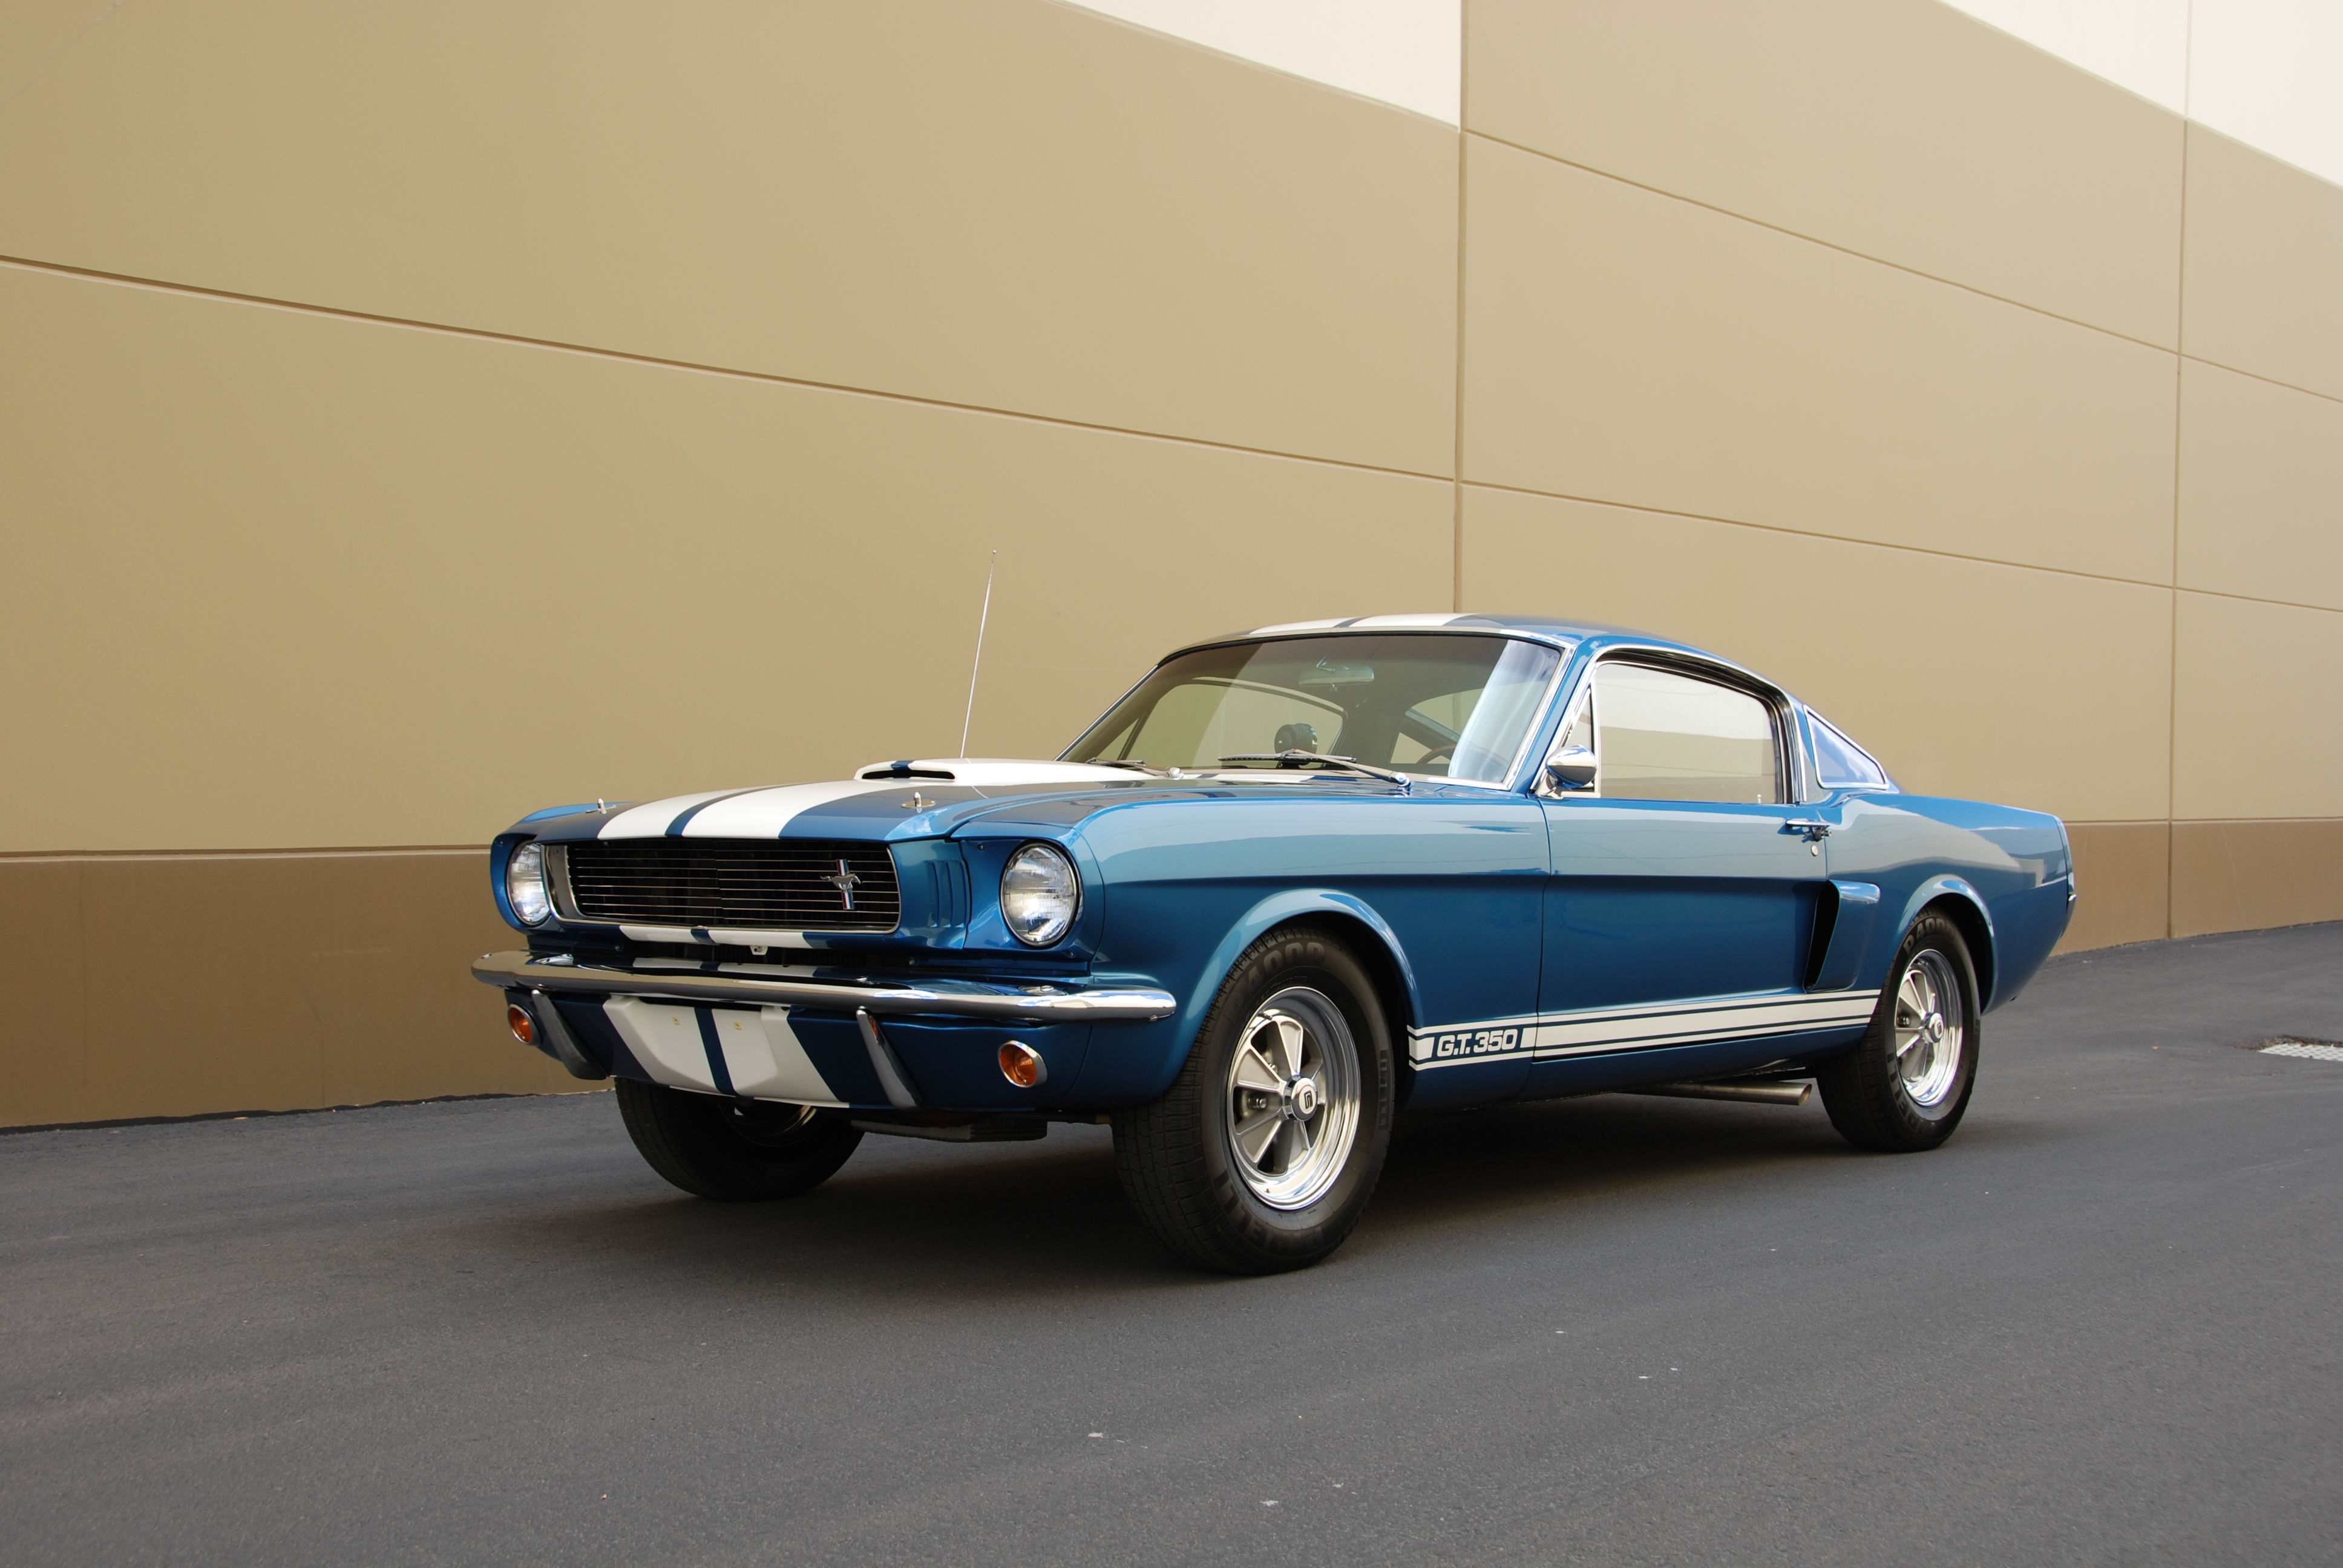 Blue Car Car Fastback Ford Shelby Gt350 Muscle Car 3872x2592